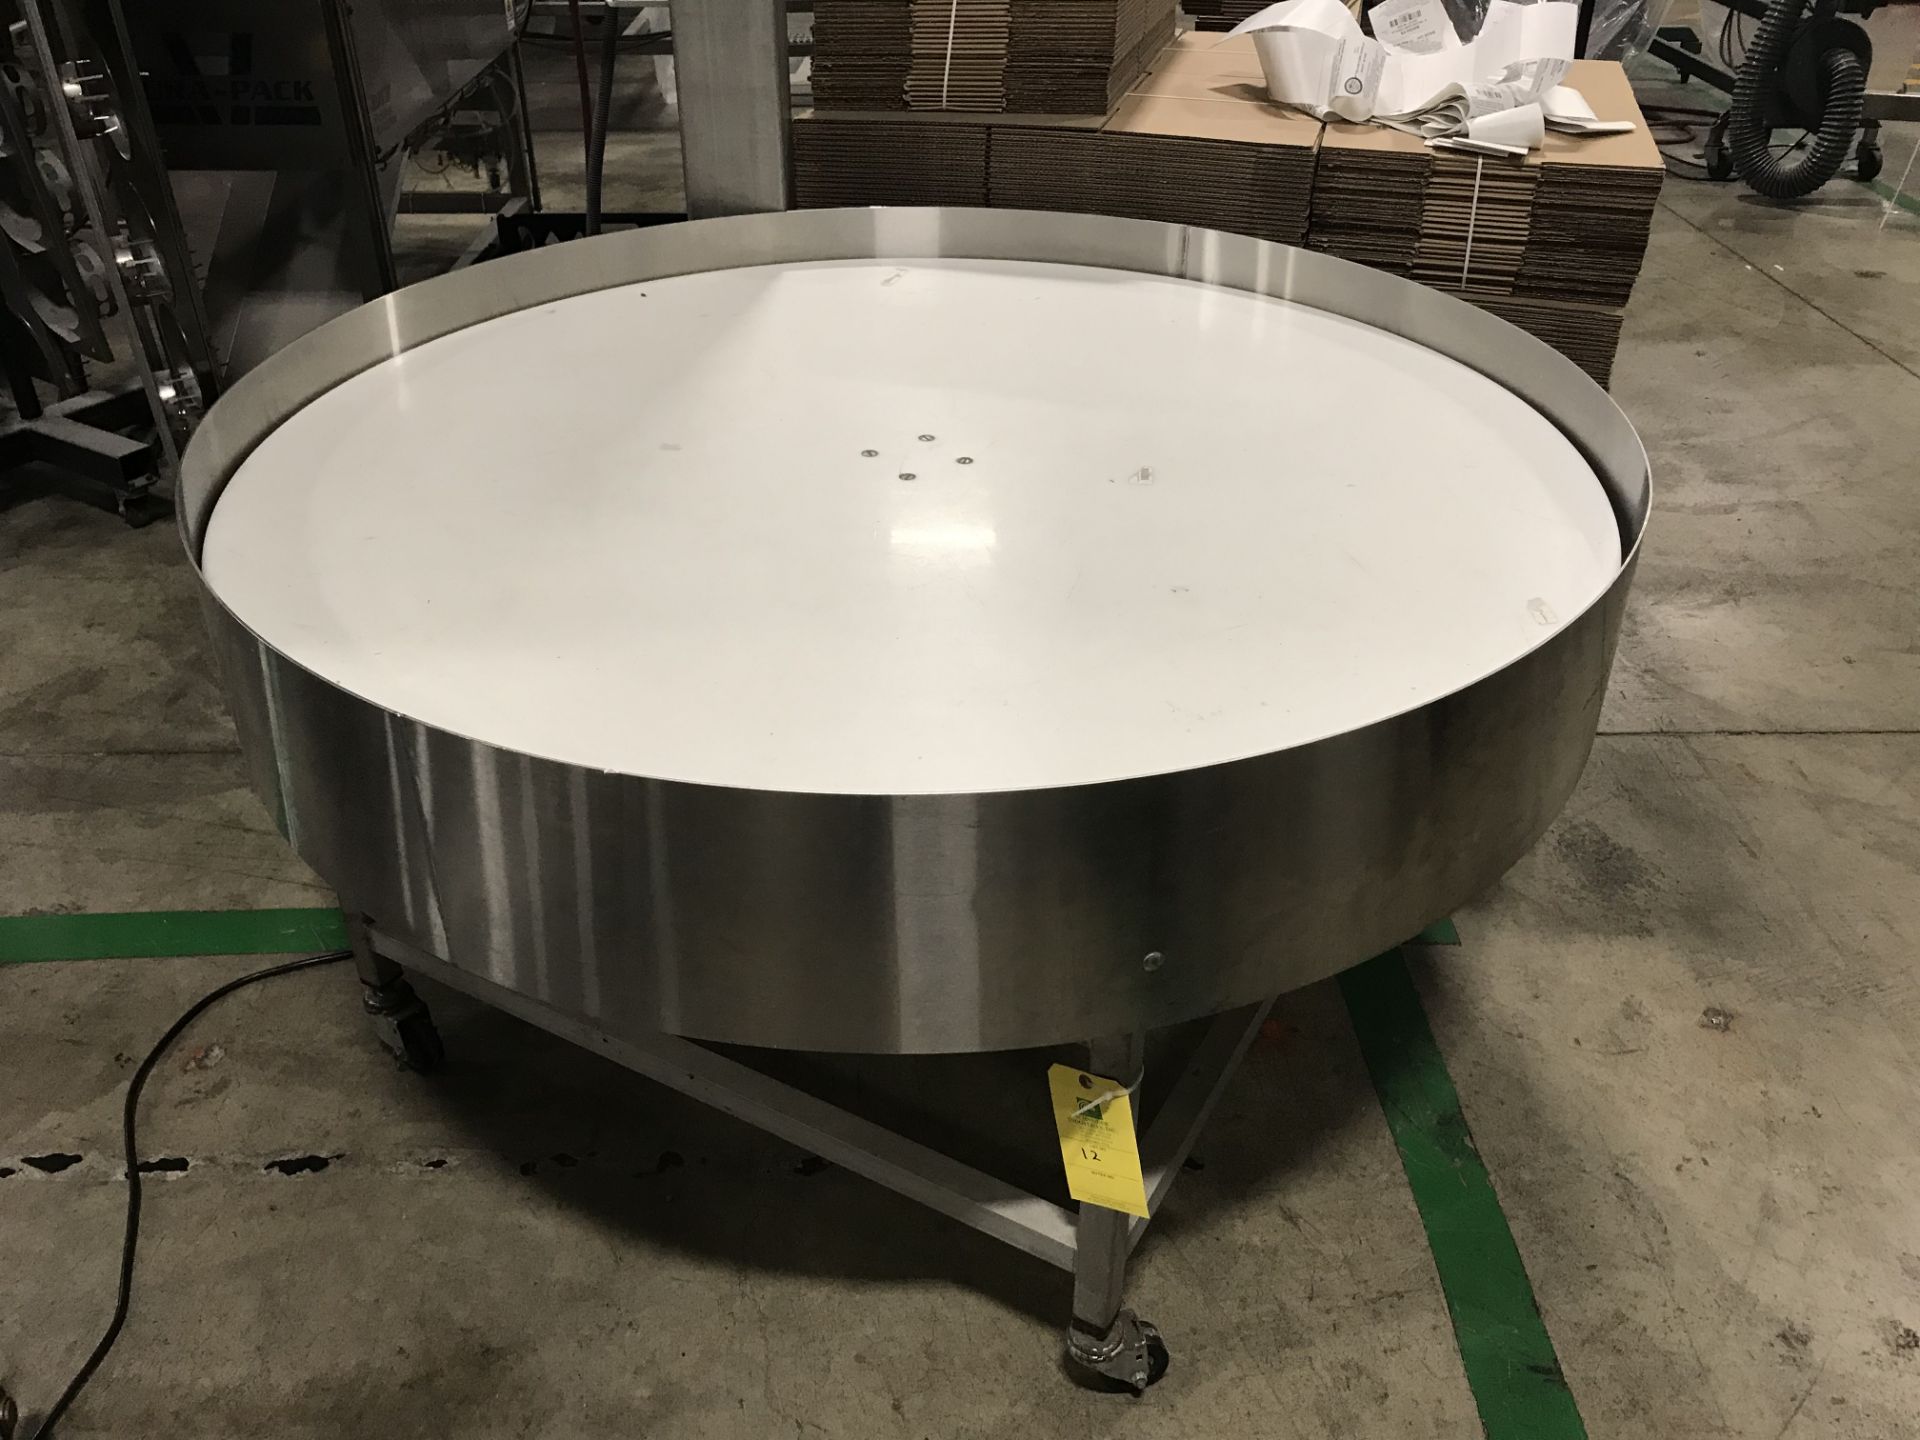 Rotary Sorting Table, 60" Diameter, 3/4" Thick White UHMW, Motor 230/460 VAC, 20 RPM Variable Speed